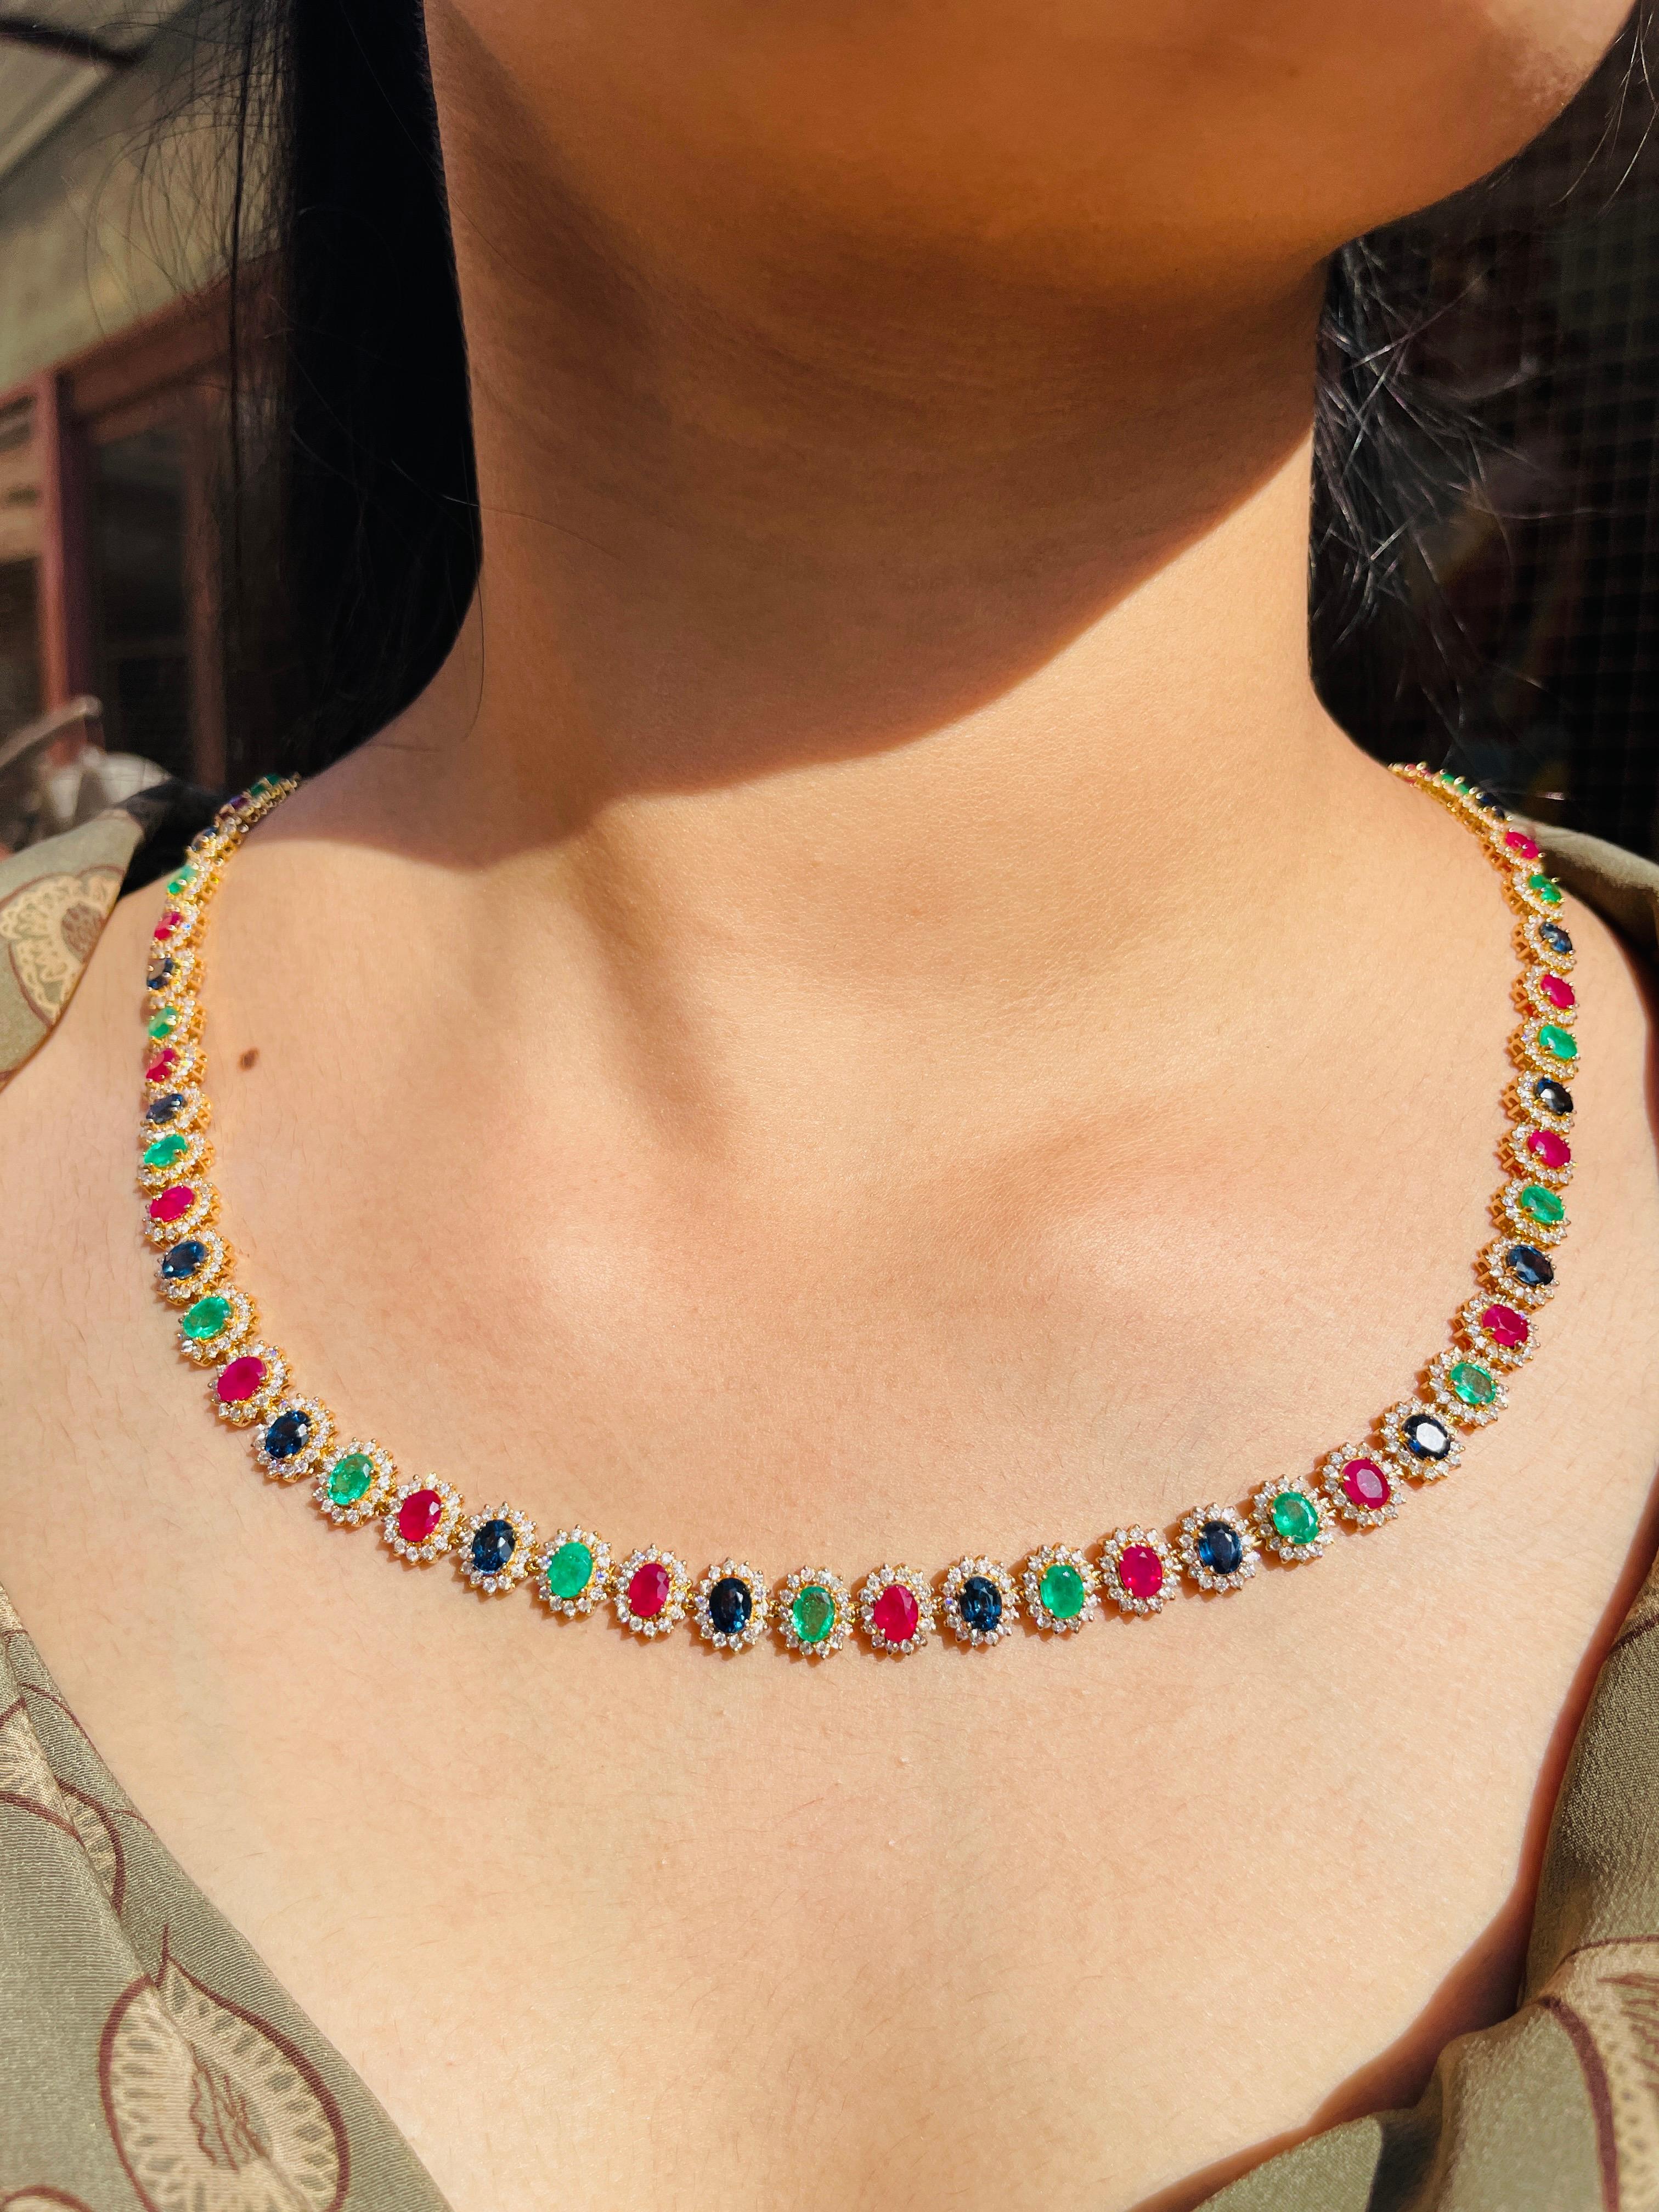 Multi Gemstone Necklace in 18K Gold studded with round cut emerald , ruby , sapphire pieces and diamonds.
Accessorize your look with this elegant multi gemstone beaded necklace. This stunning piece of jewelry instantly elevates a casual look or